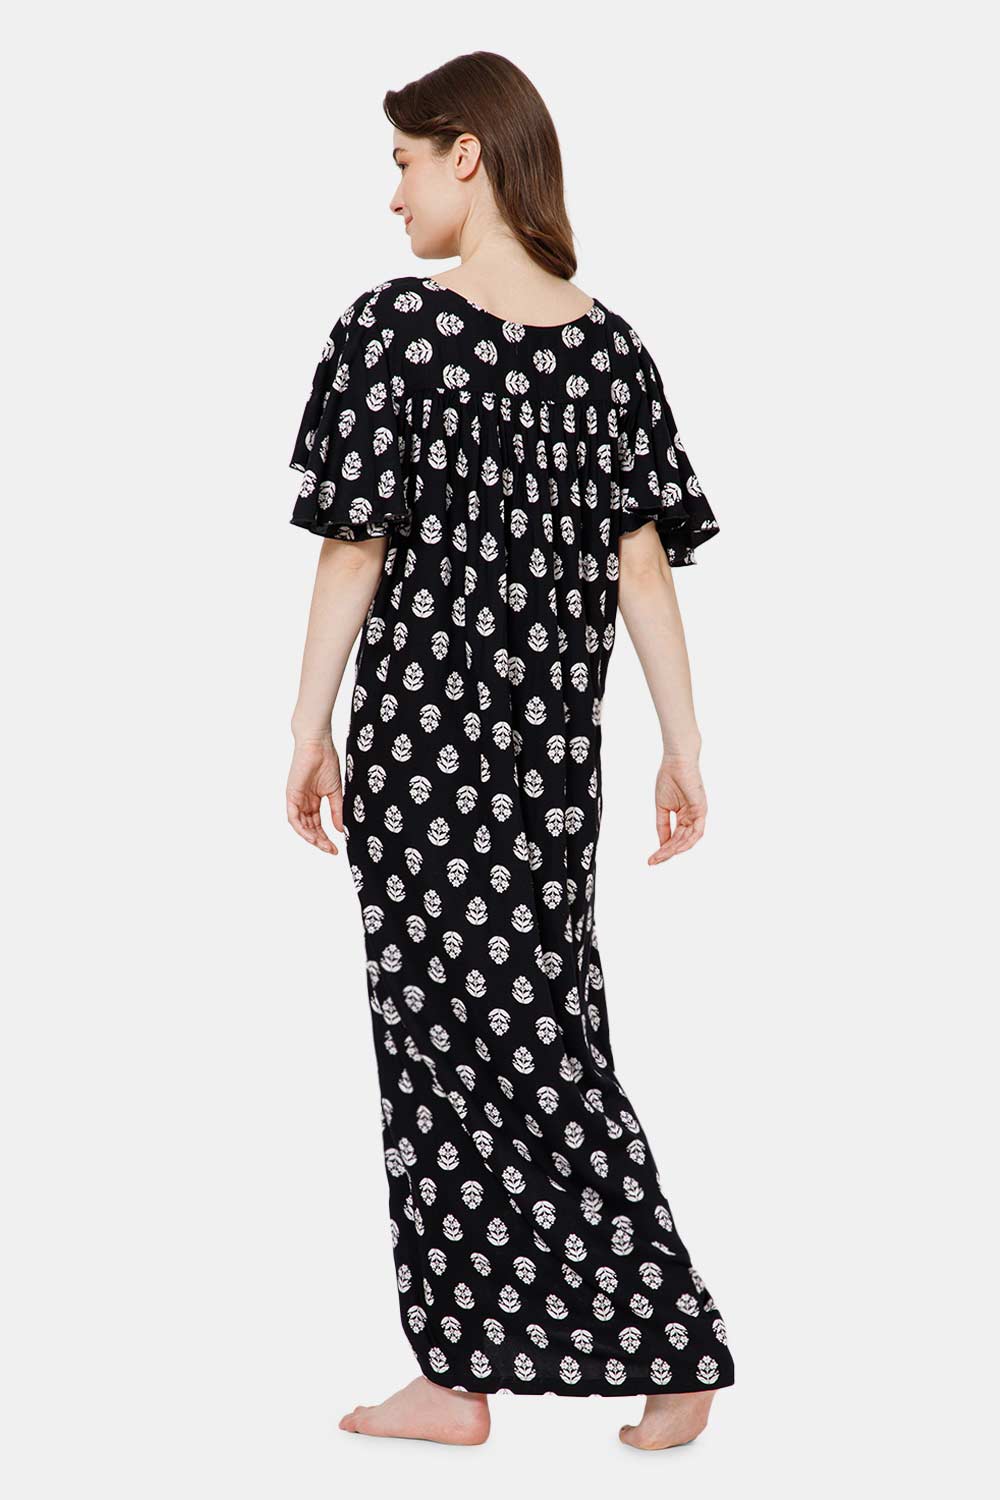 Naidu Hall All Over Printed Nighty with Butterfly Sleeves Diamond Neck - Black print-3 - NT37